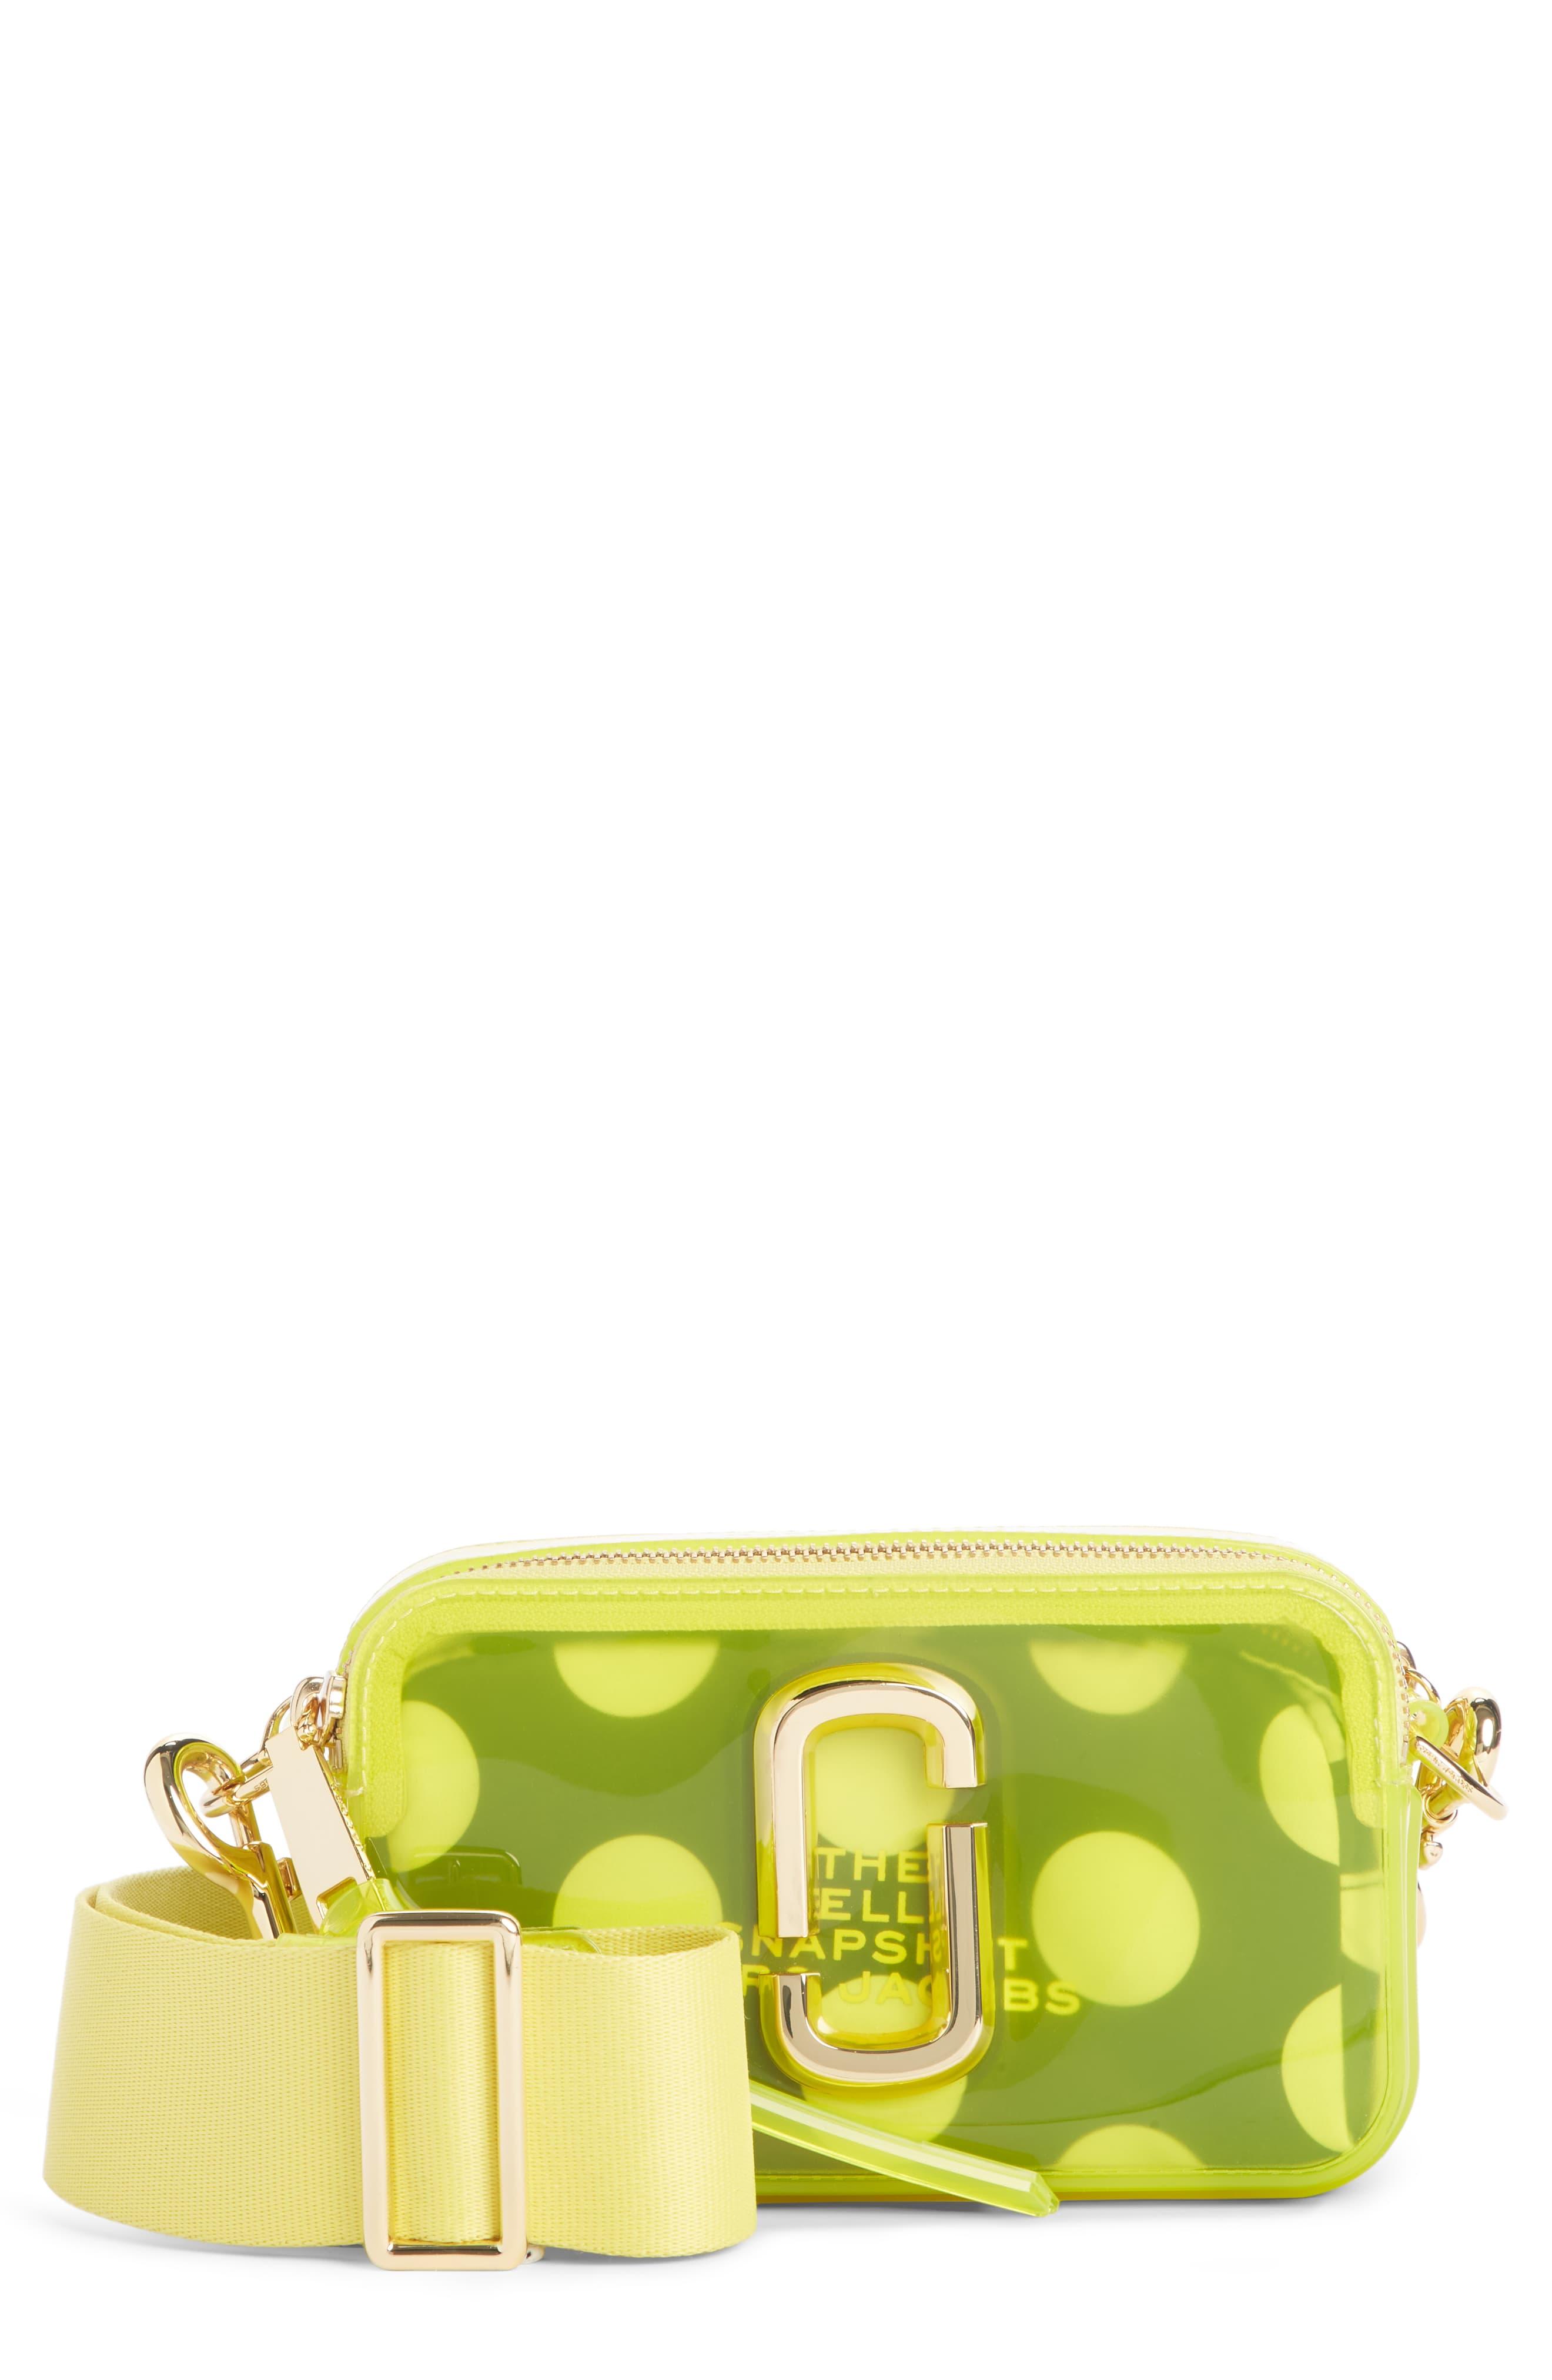 Marc Jacobs The Jelly Snapshot Crossbody Bag - in Yellow - Lyst